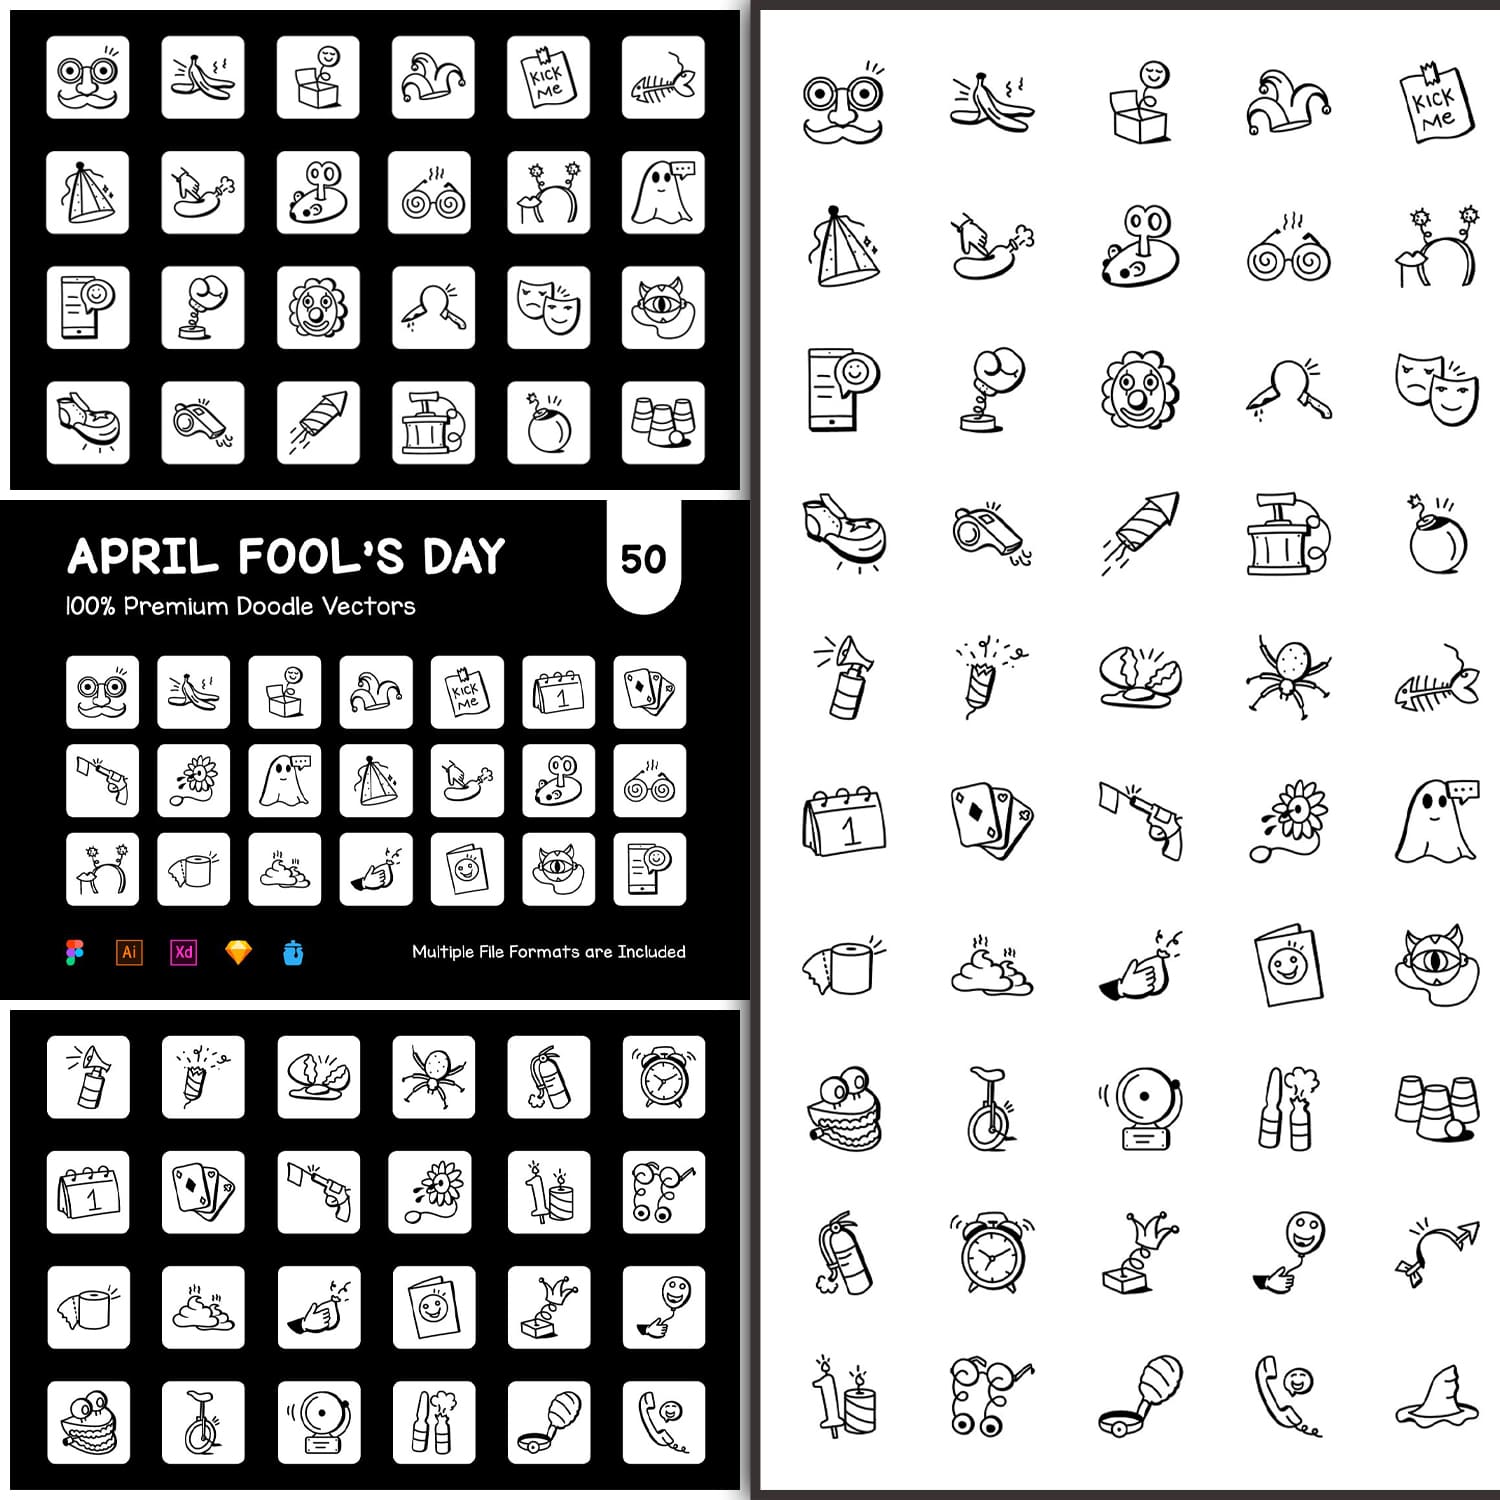 50 Doodle April Fool’s Day Icons Cover.